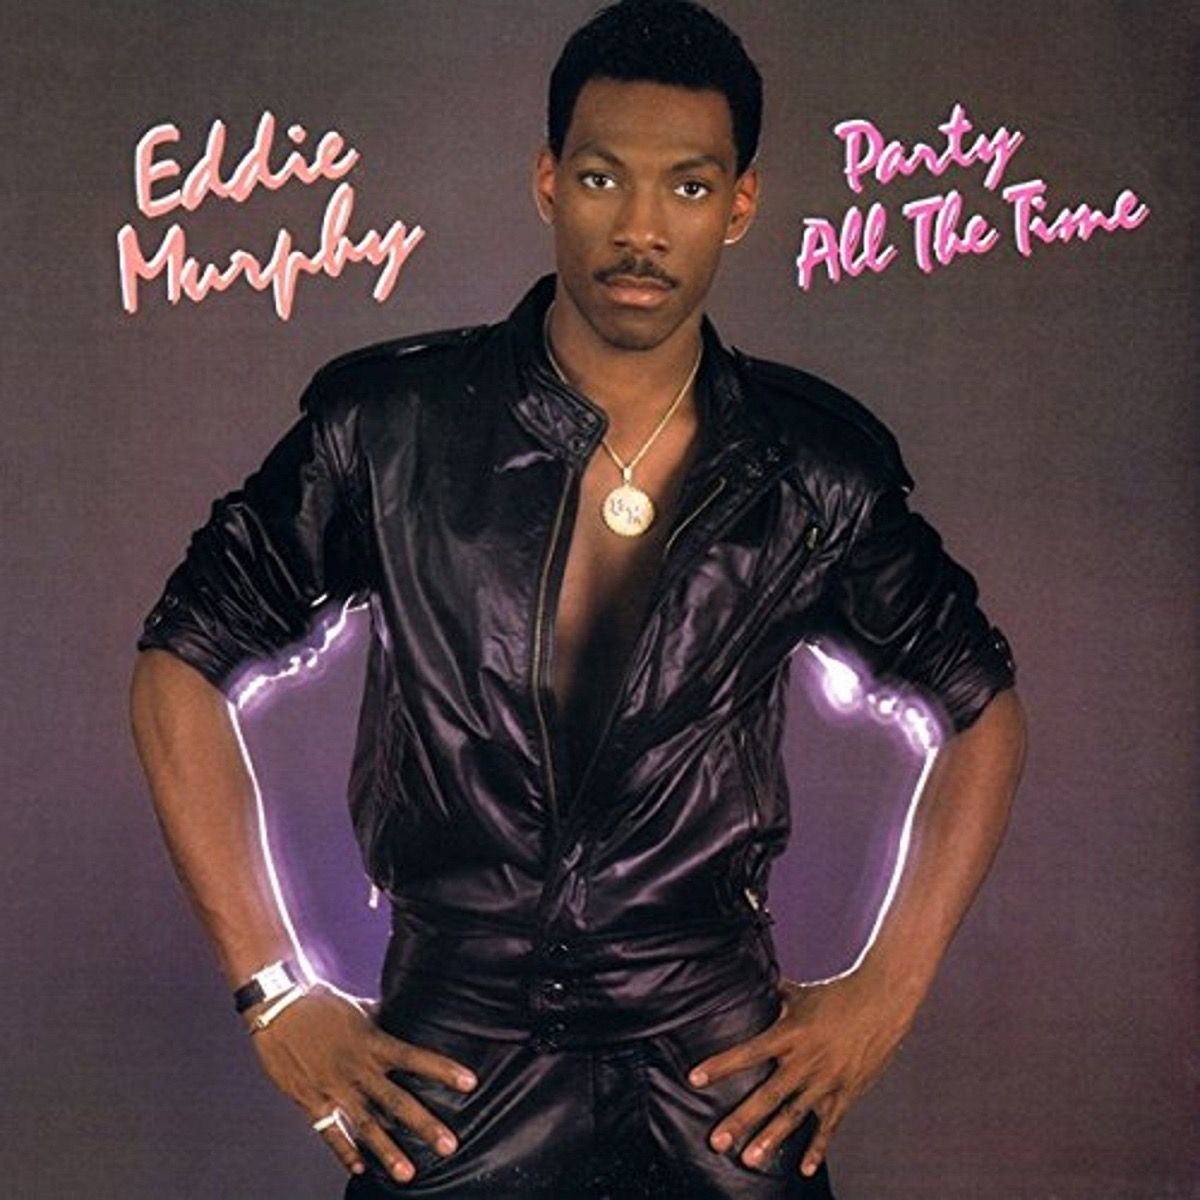 Cover ng album ng Eddie Murphy Party All the Time